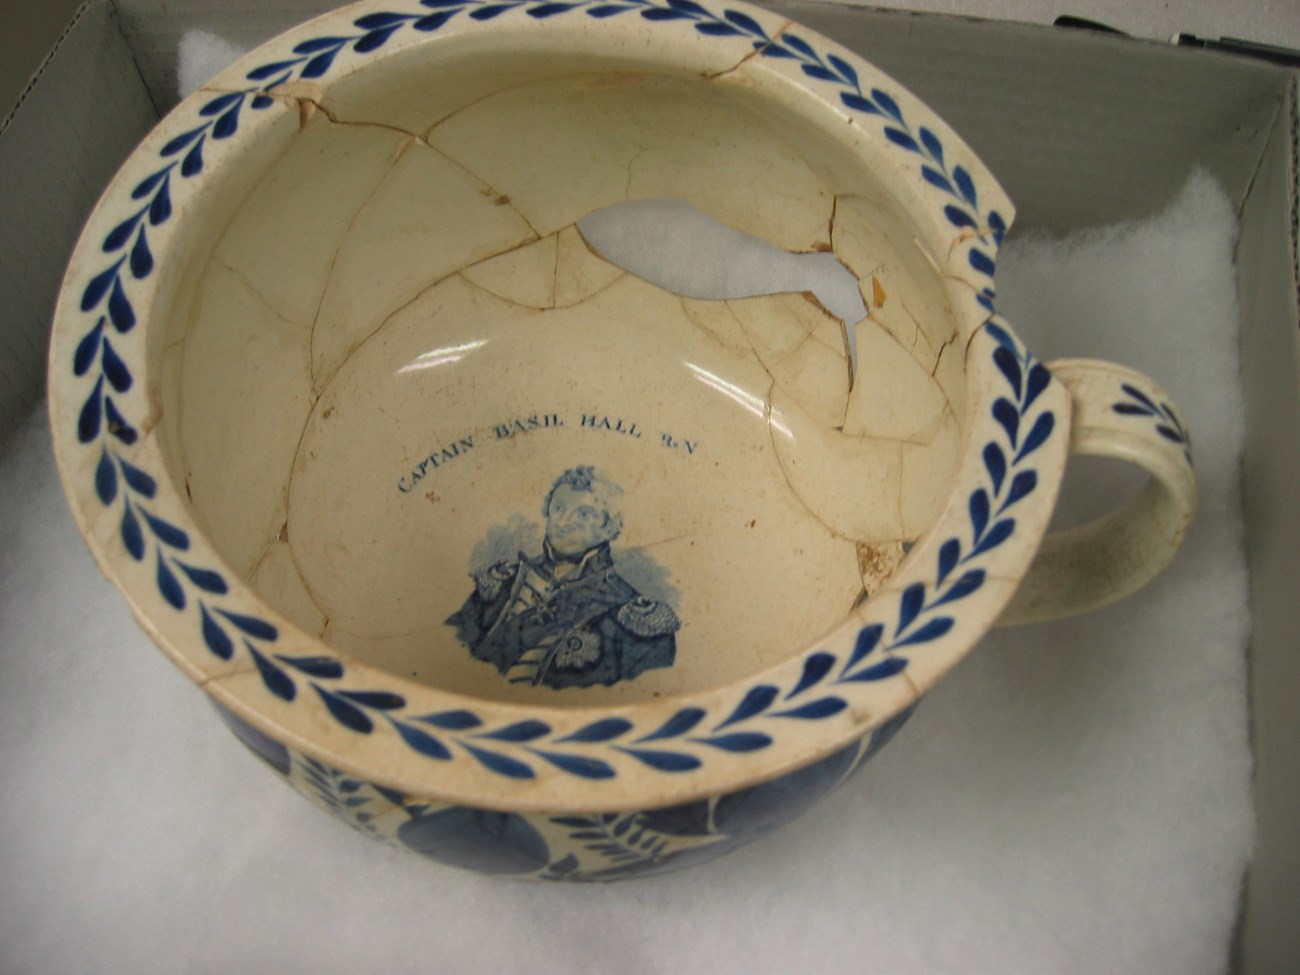 A large bowl with a mug-like handle. It has a decorative lip and a portrait of a man on the inside.